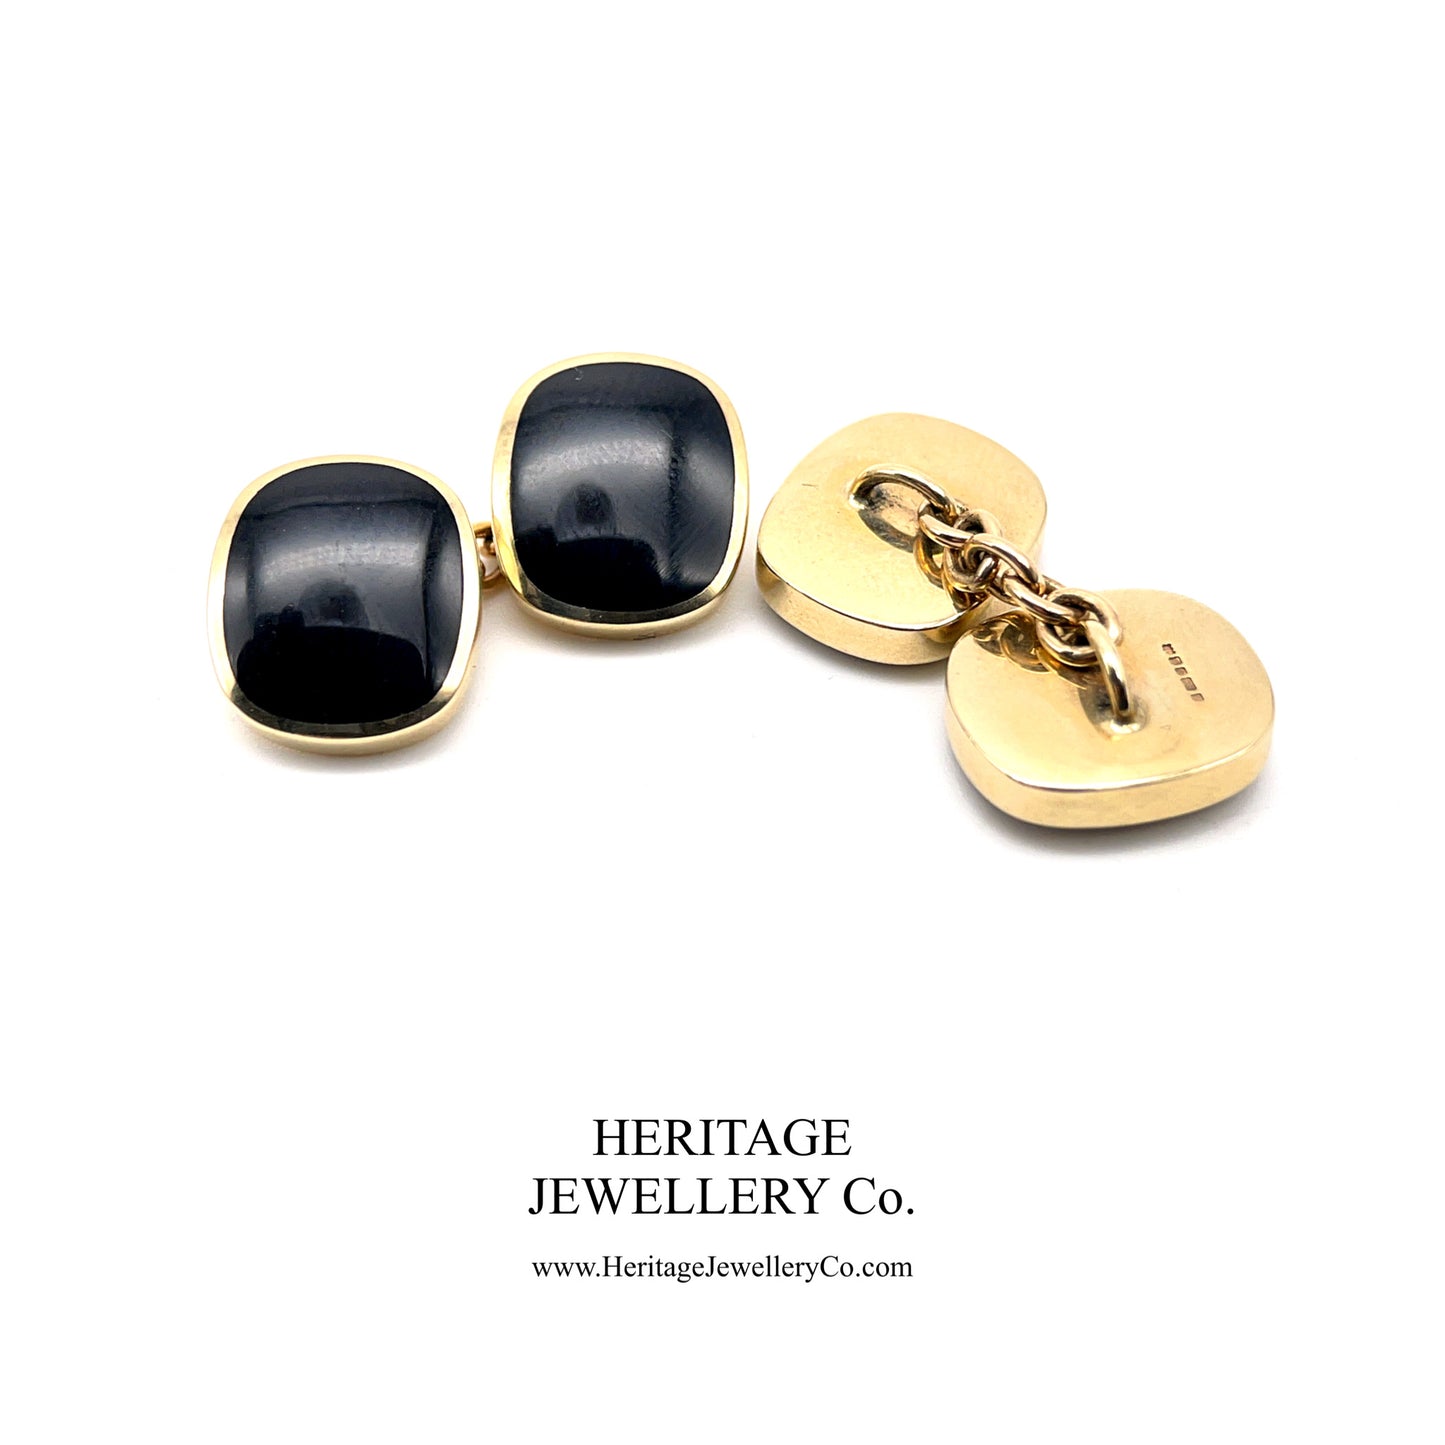 Vintage Gold and Onyx Cufflinks with Antique Box (9ct gold)